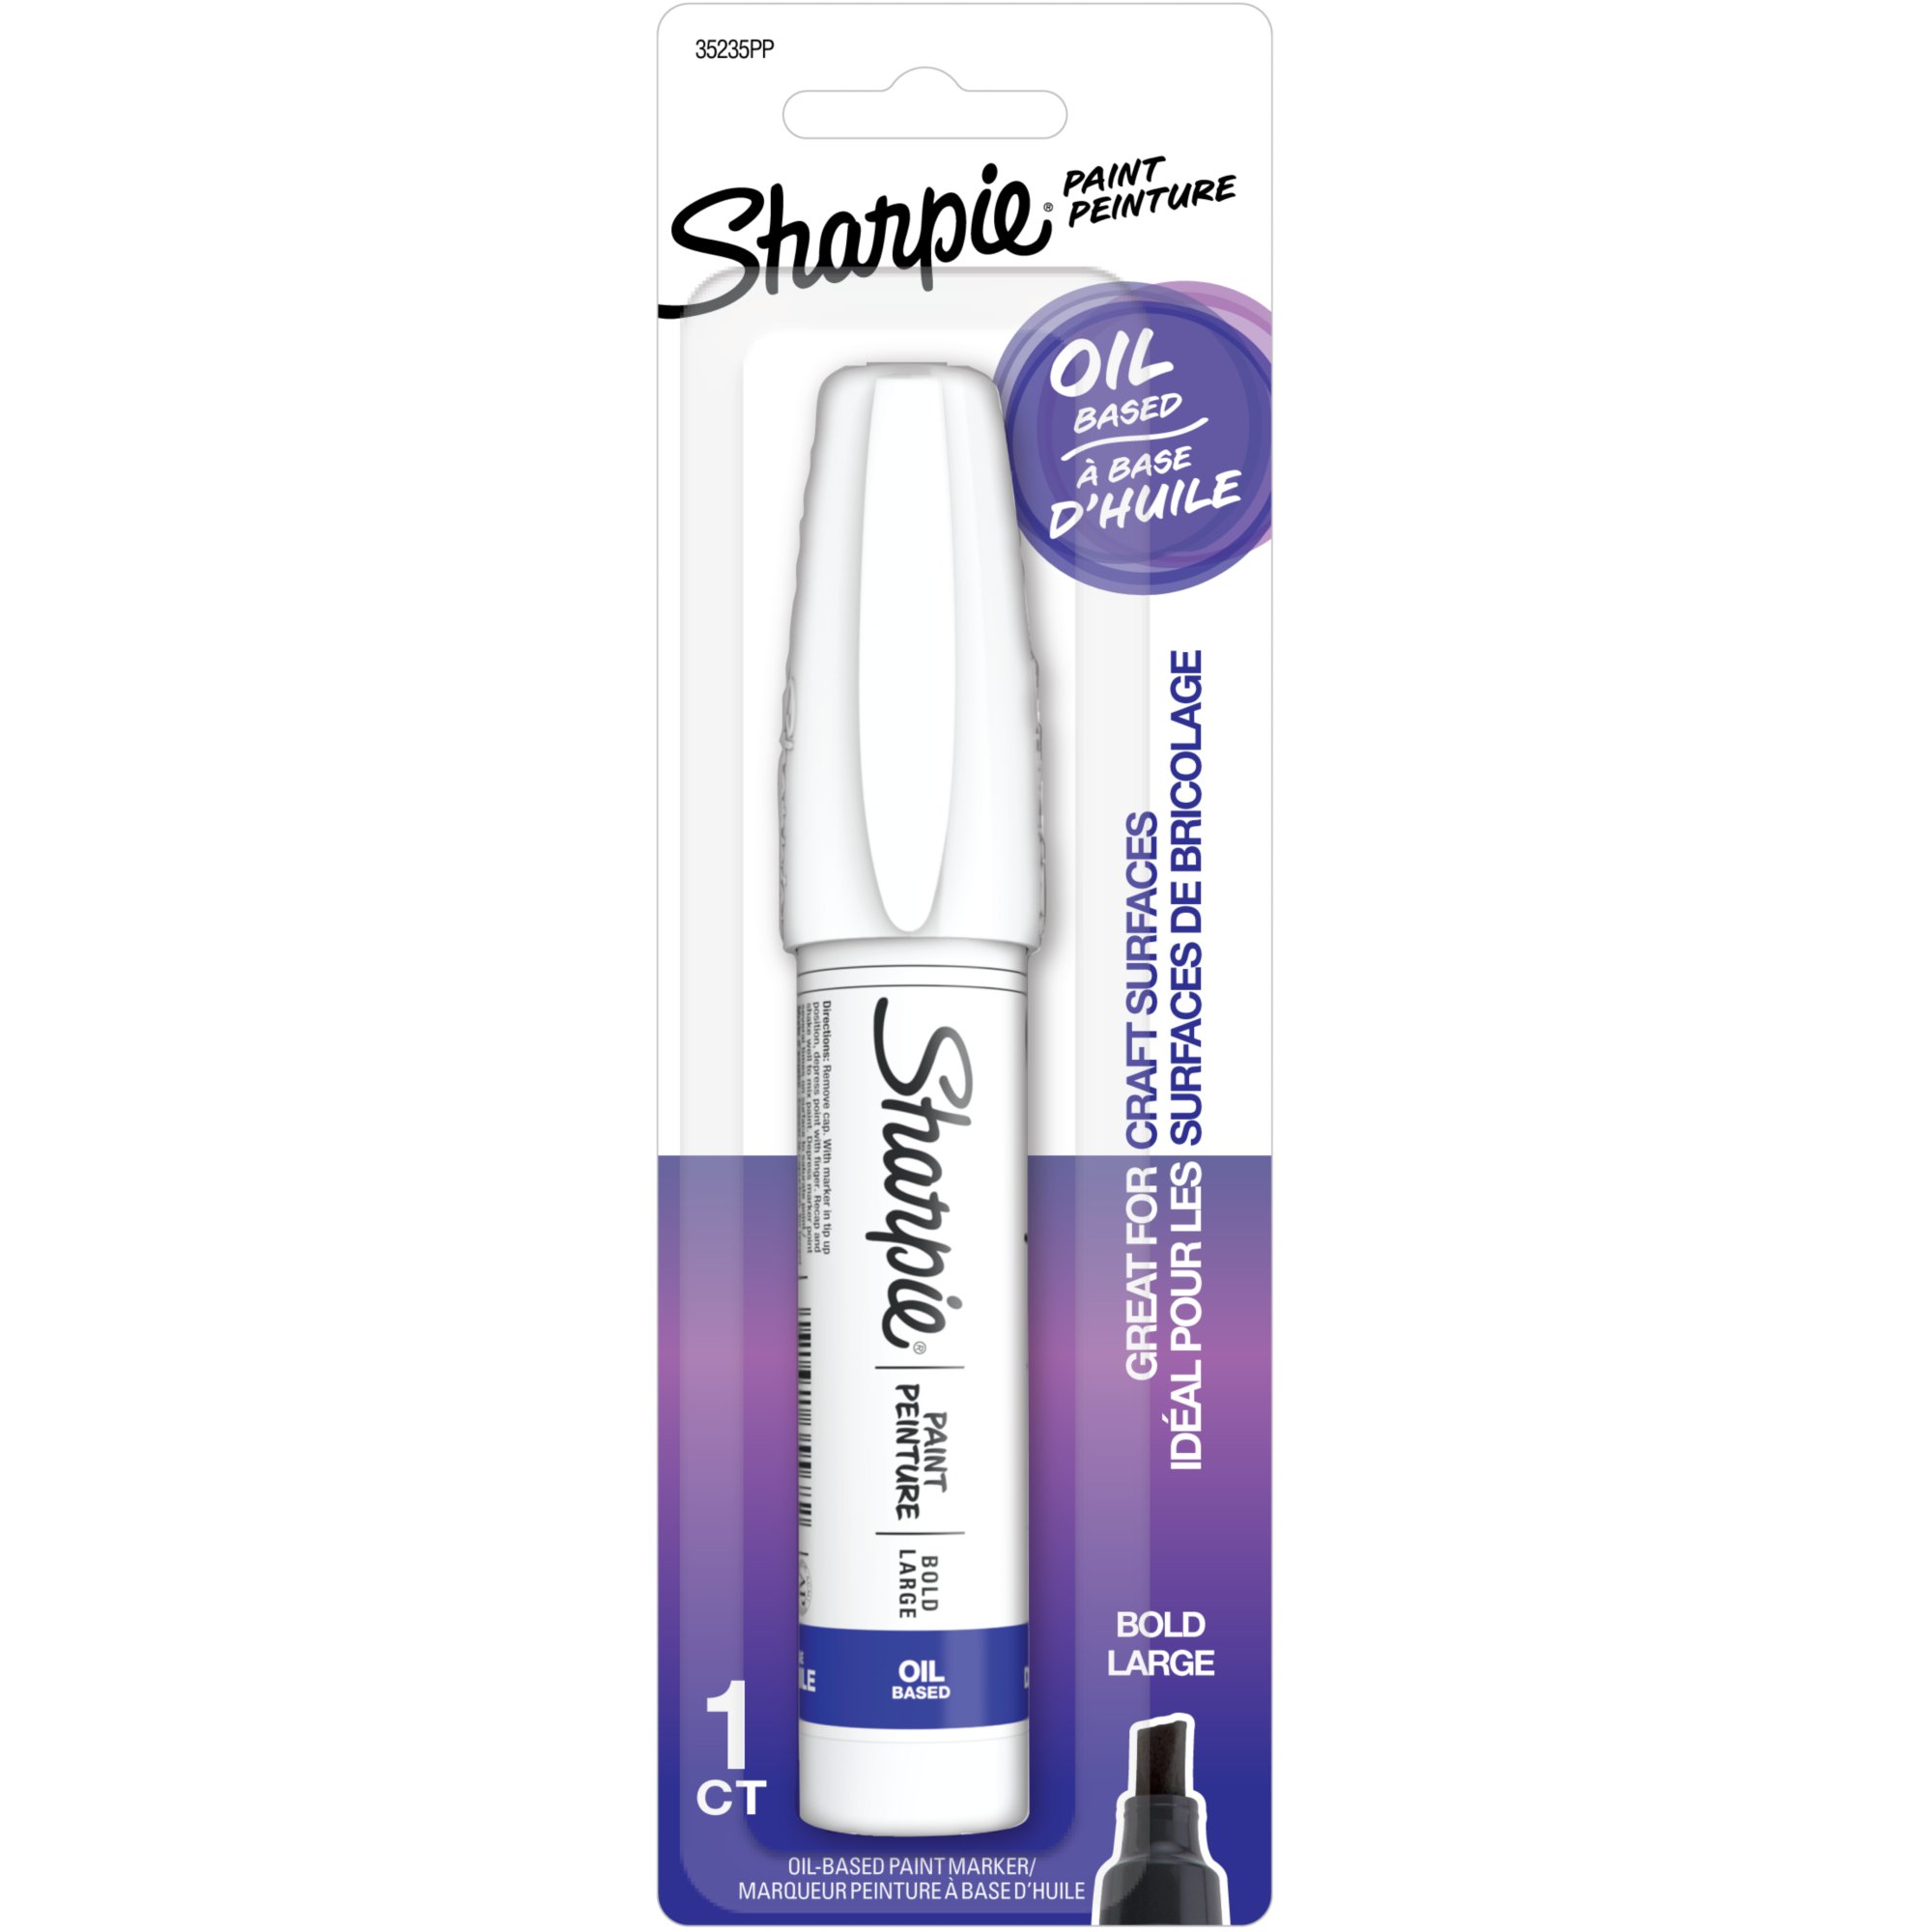 SHARPIE Oil-Based Paint Markers, Medium Point, Bright Colors, 5 Count -  Great for Rock Painting